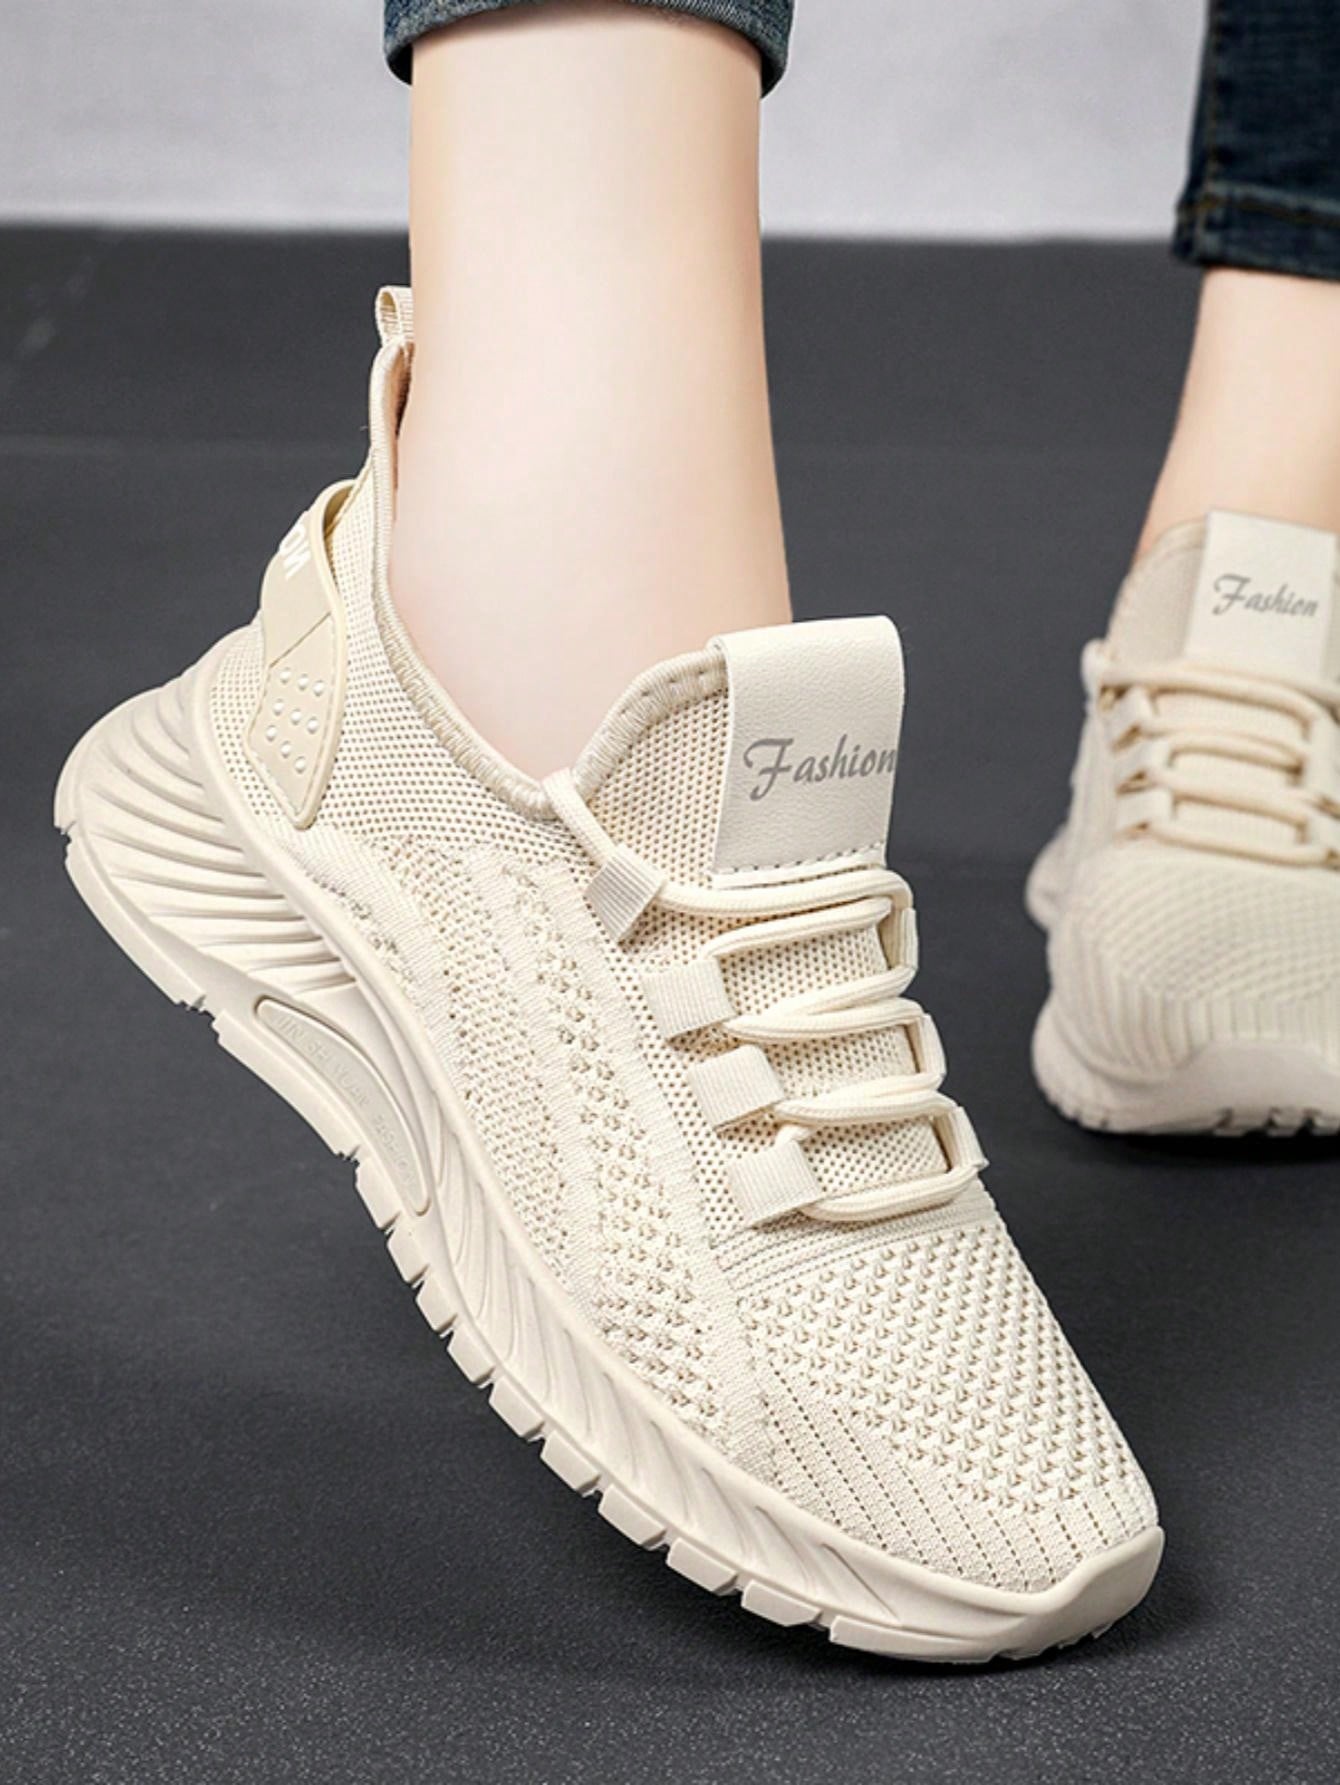 New Season Running Shoes For Women, Lightweight, Comfortable, Shock-Absorbing, Non-Slip, Breathable, Knitted, Casual Athletic Sneakers, Walking Shoes-Beige-5